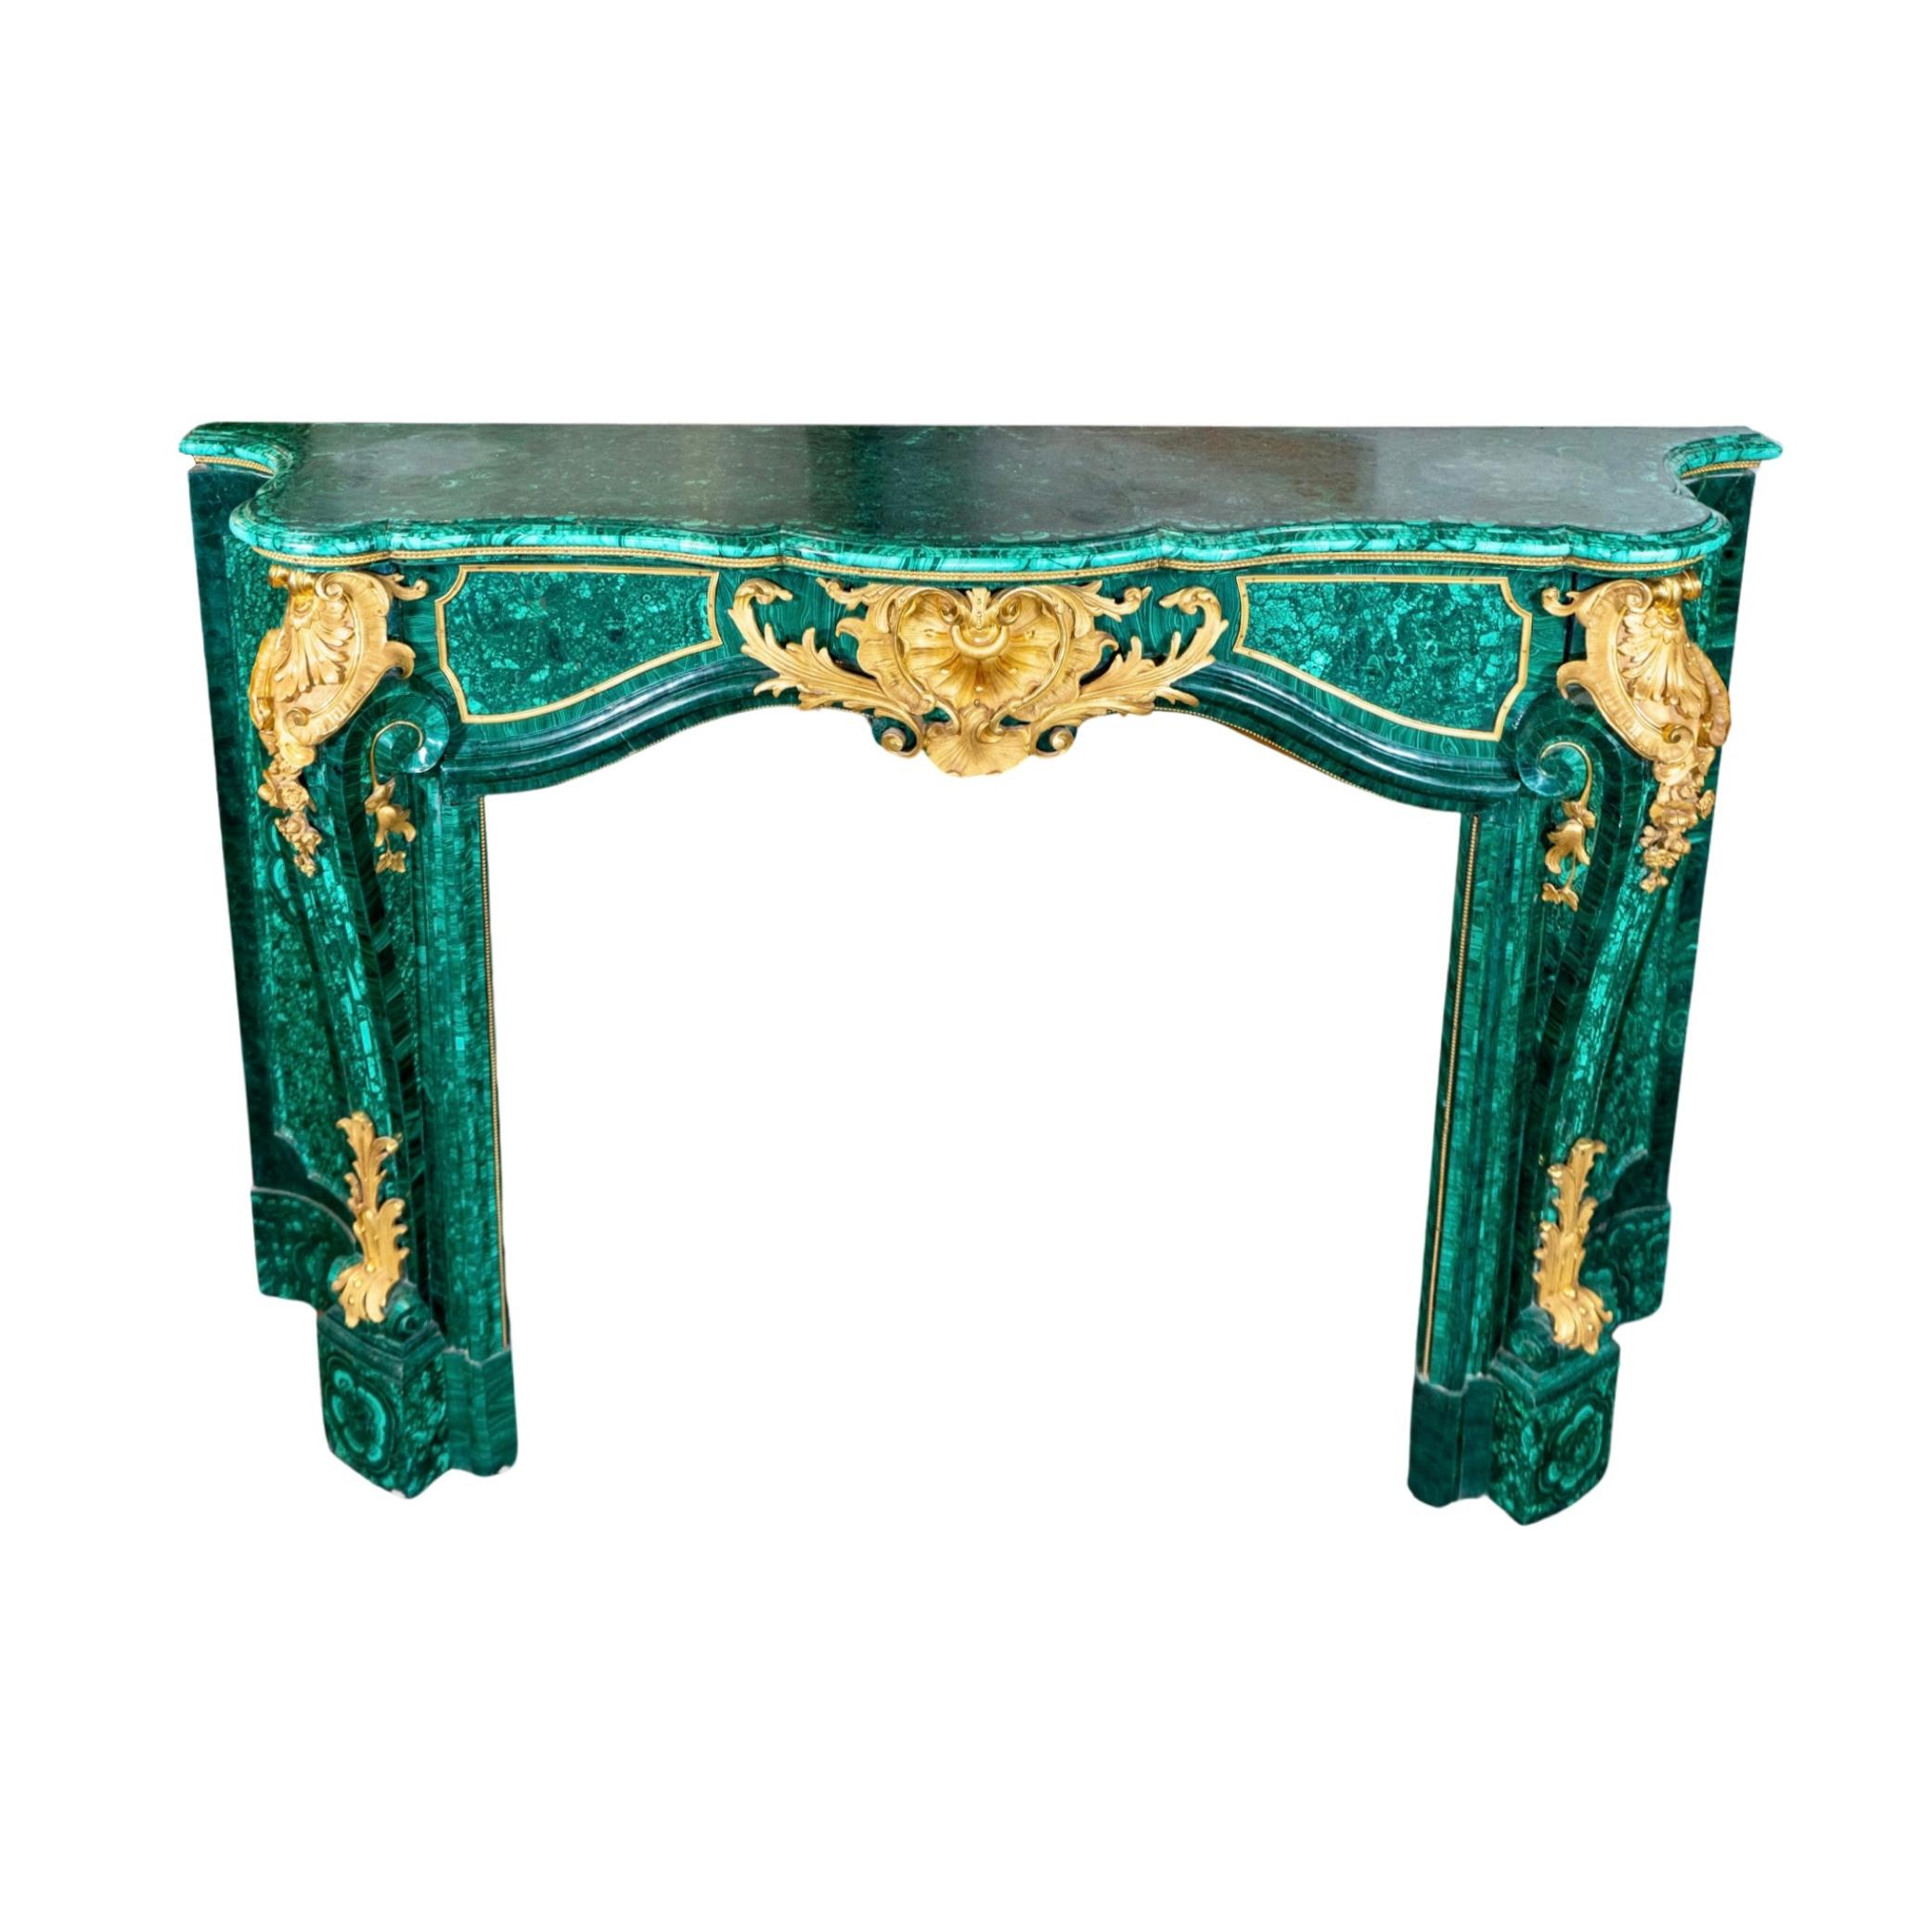 This French Marble Mantel from the 20th century is a luxurious addition to any home. Crafted in the elegant Louis XIV style, it features stunning malachite stone in a beautiful emerald green color. The gilded bronze accent mounts add a touch of